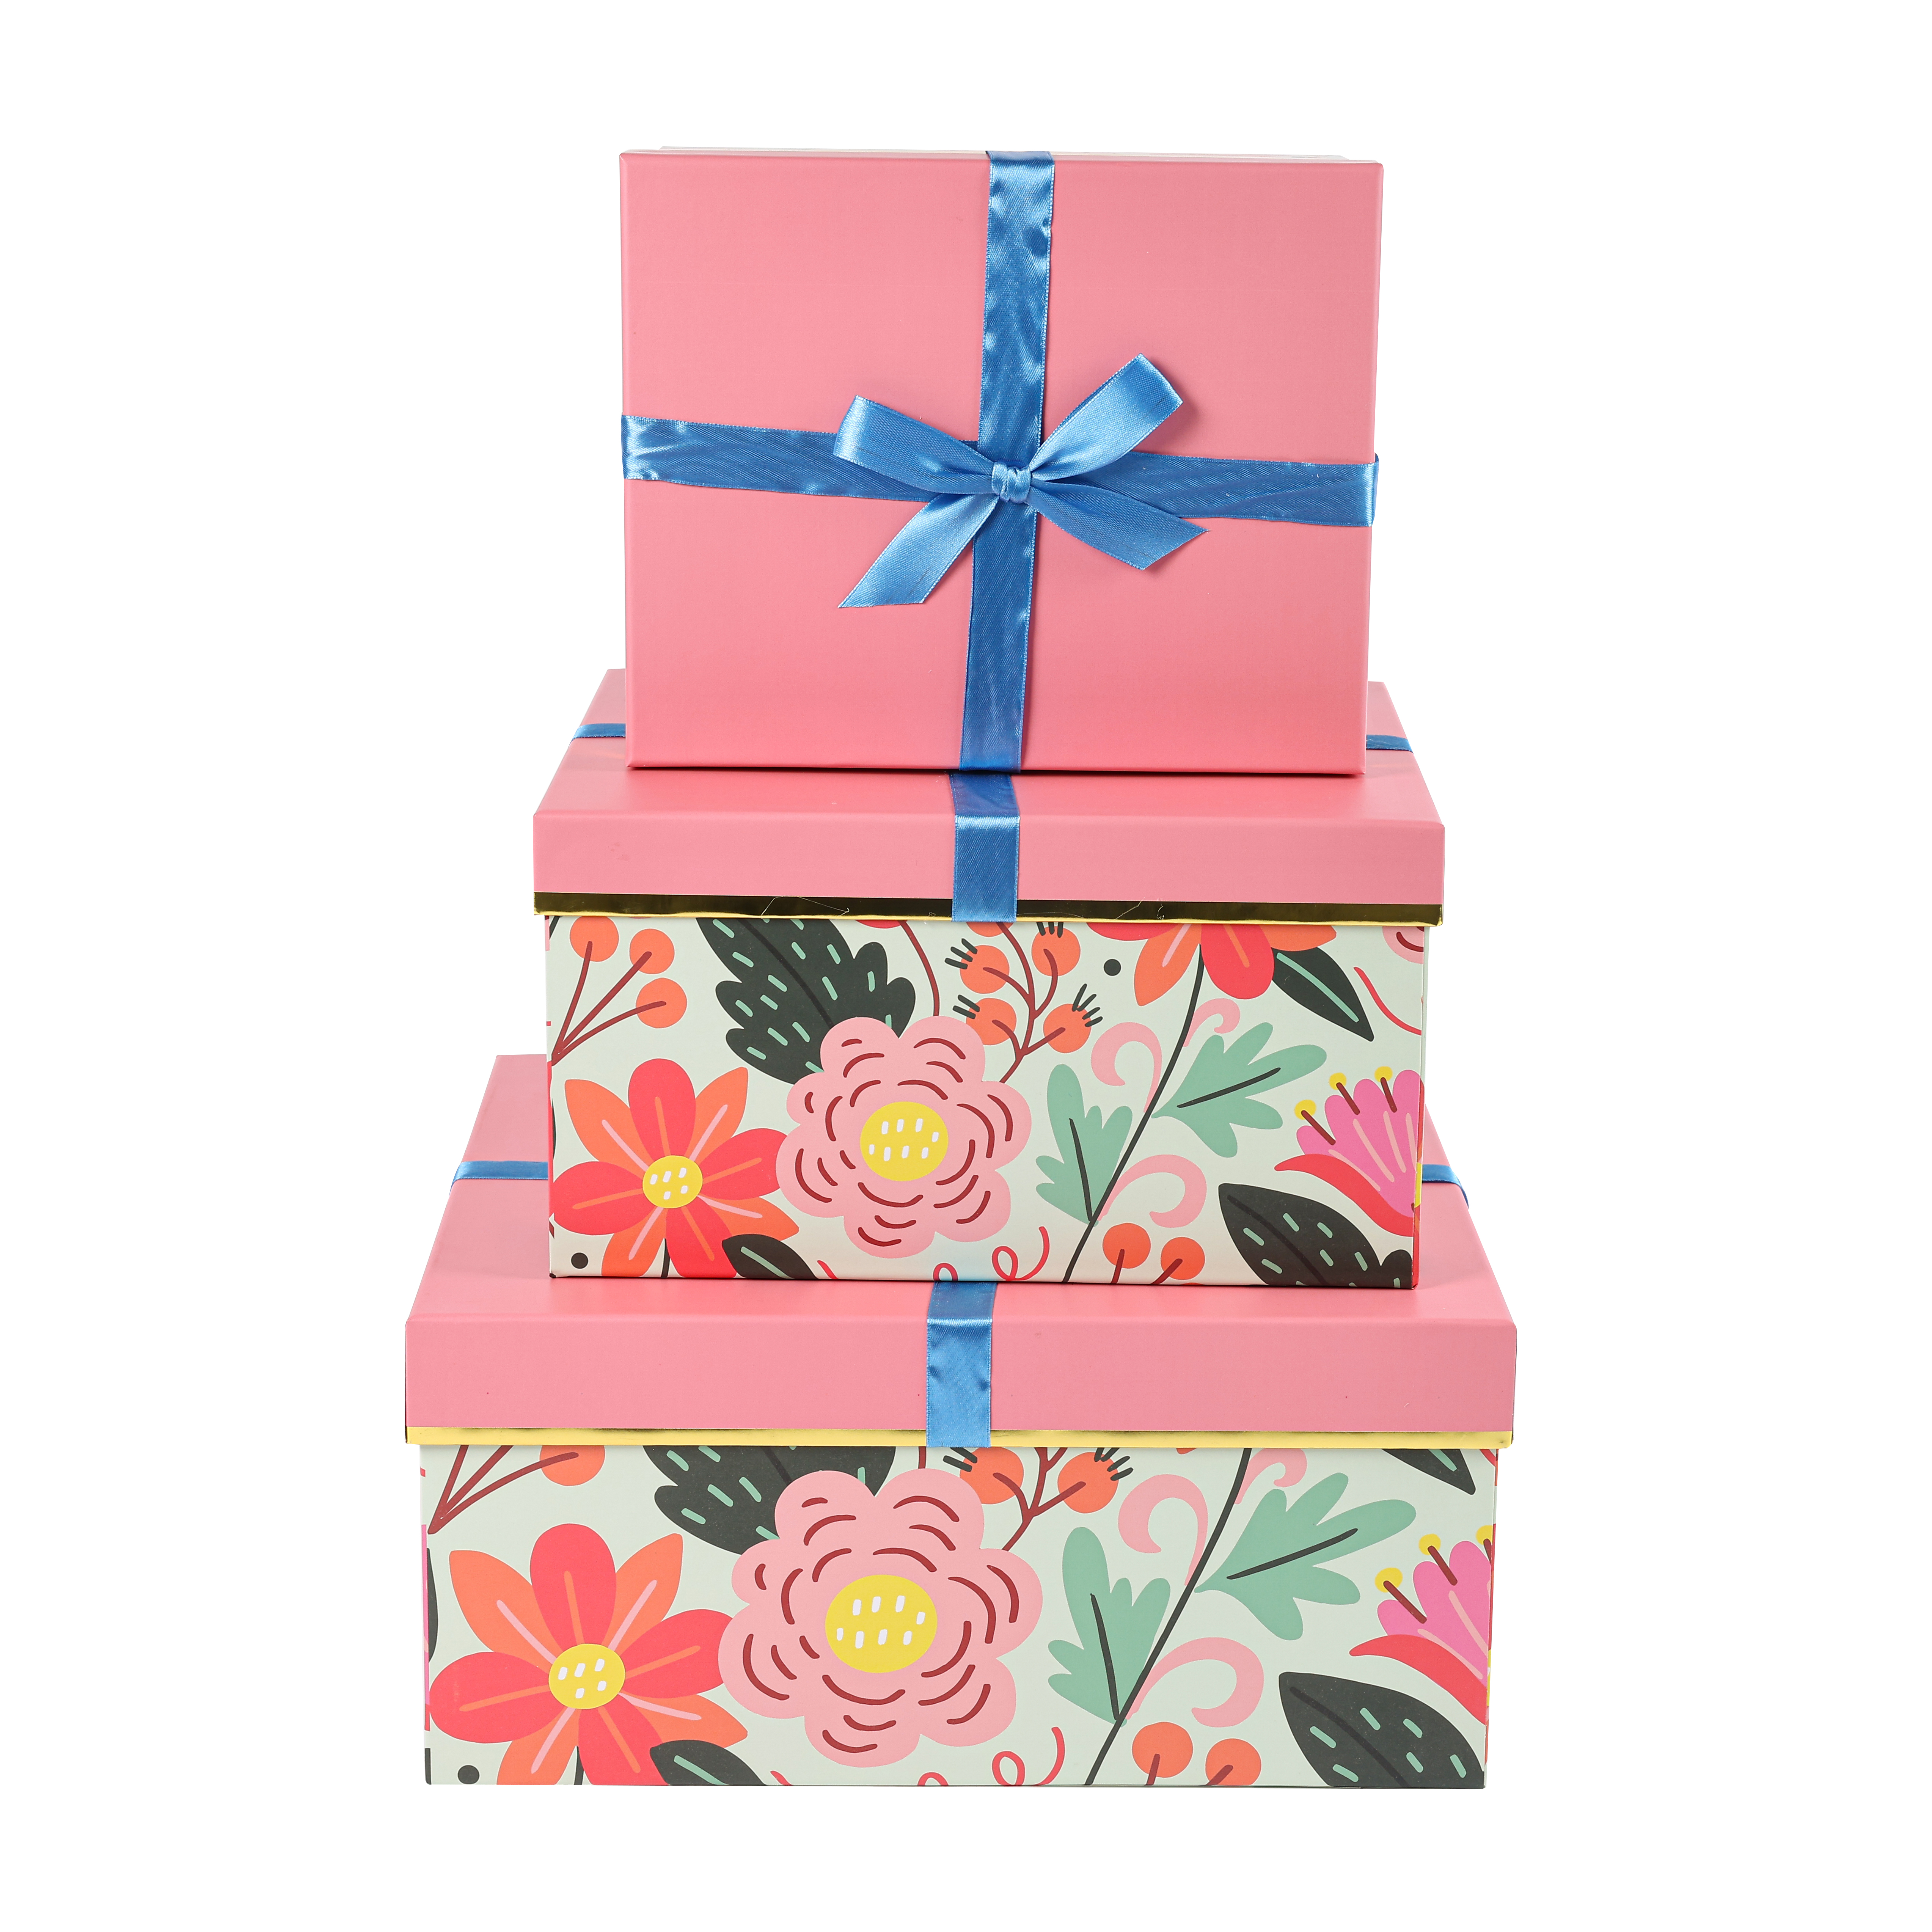 Bow Pink Flower Heaven and Earth Cover Gift Paper Box GB006